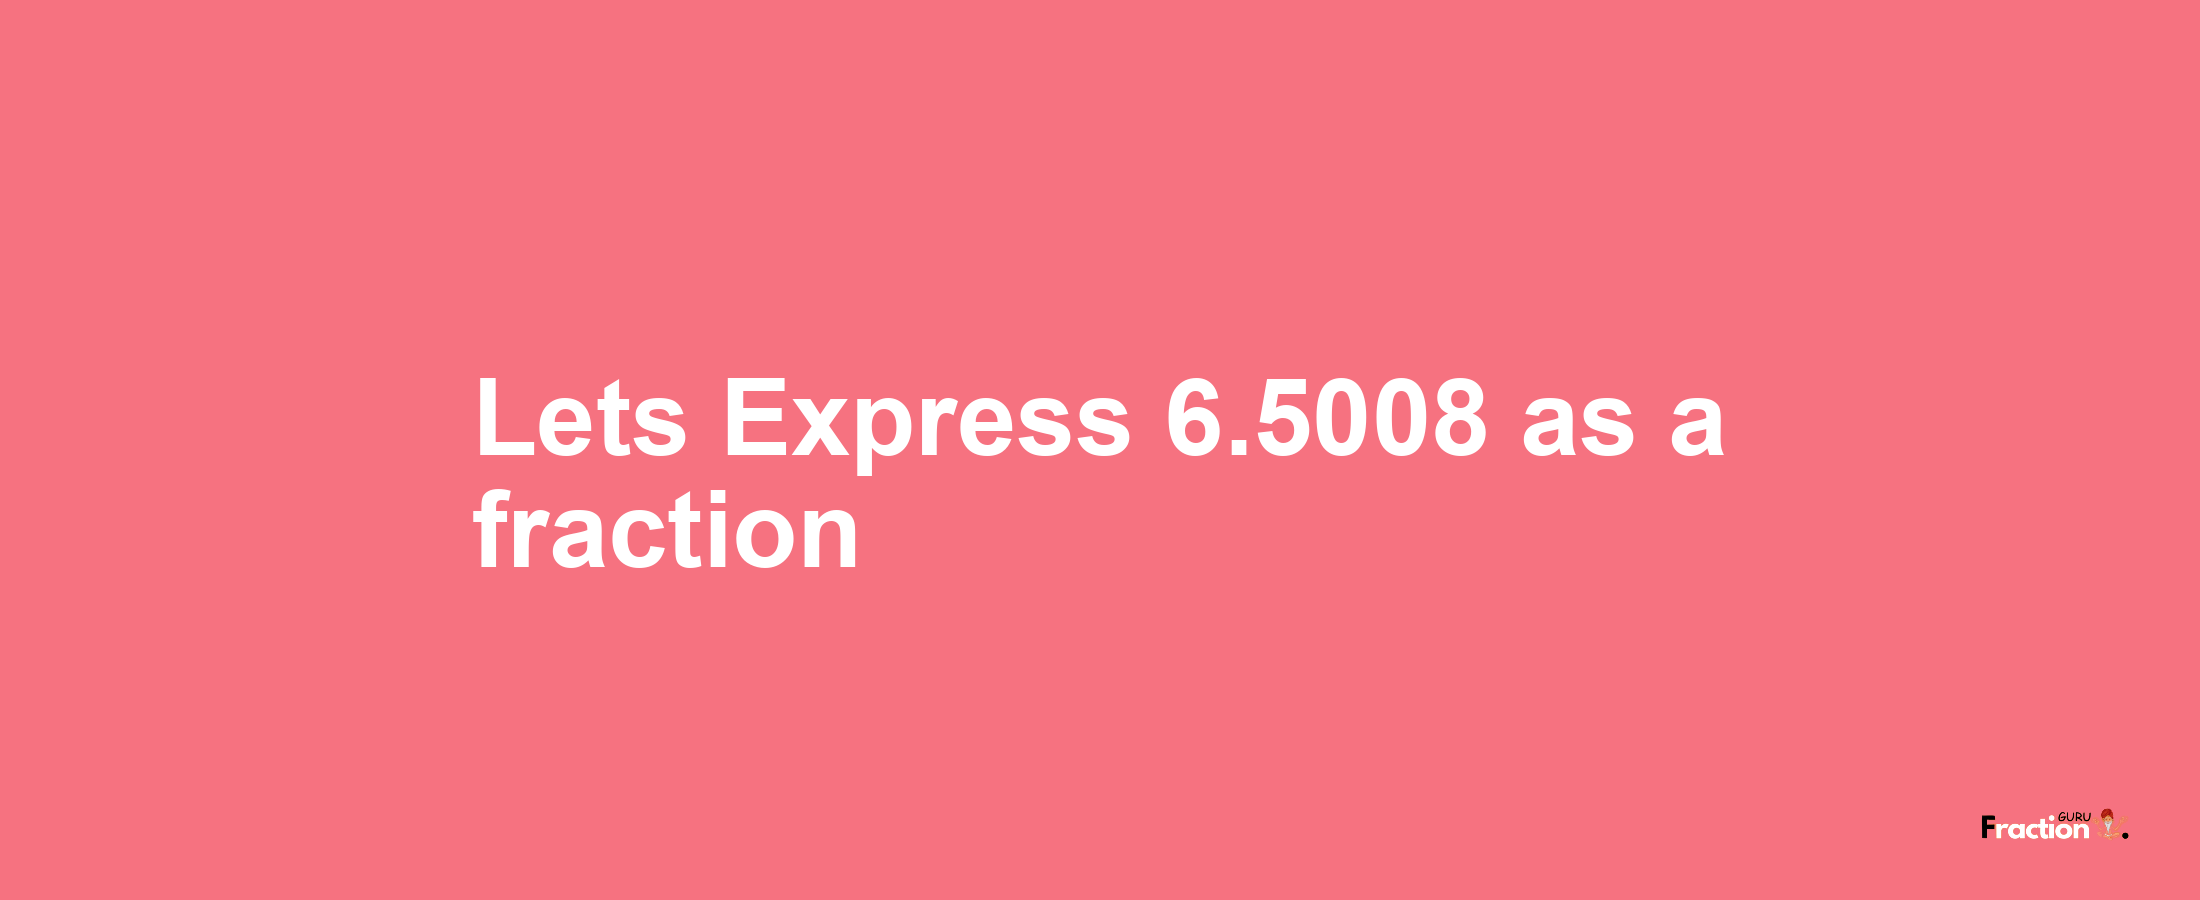 Lets Express 6.5008 as afraction